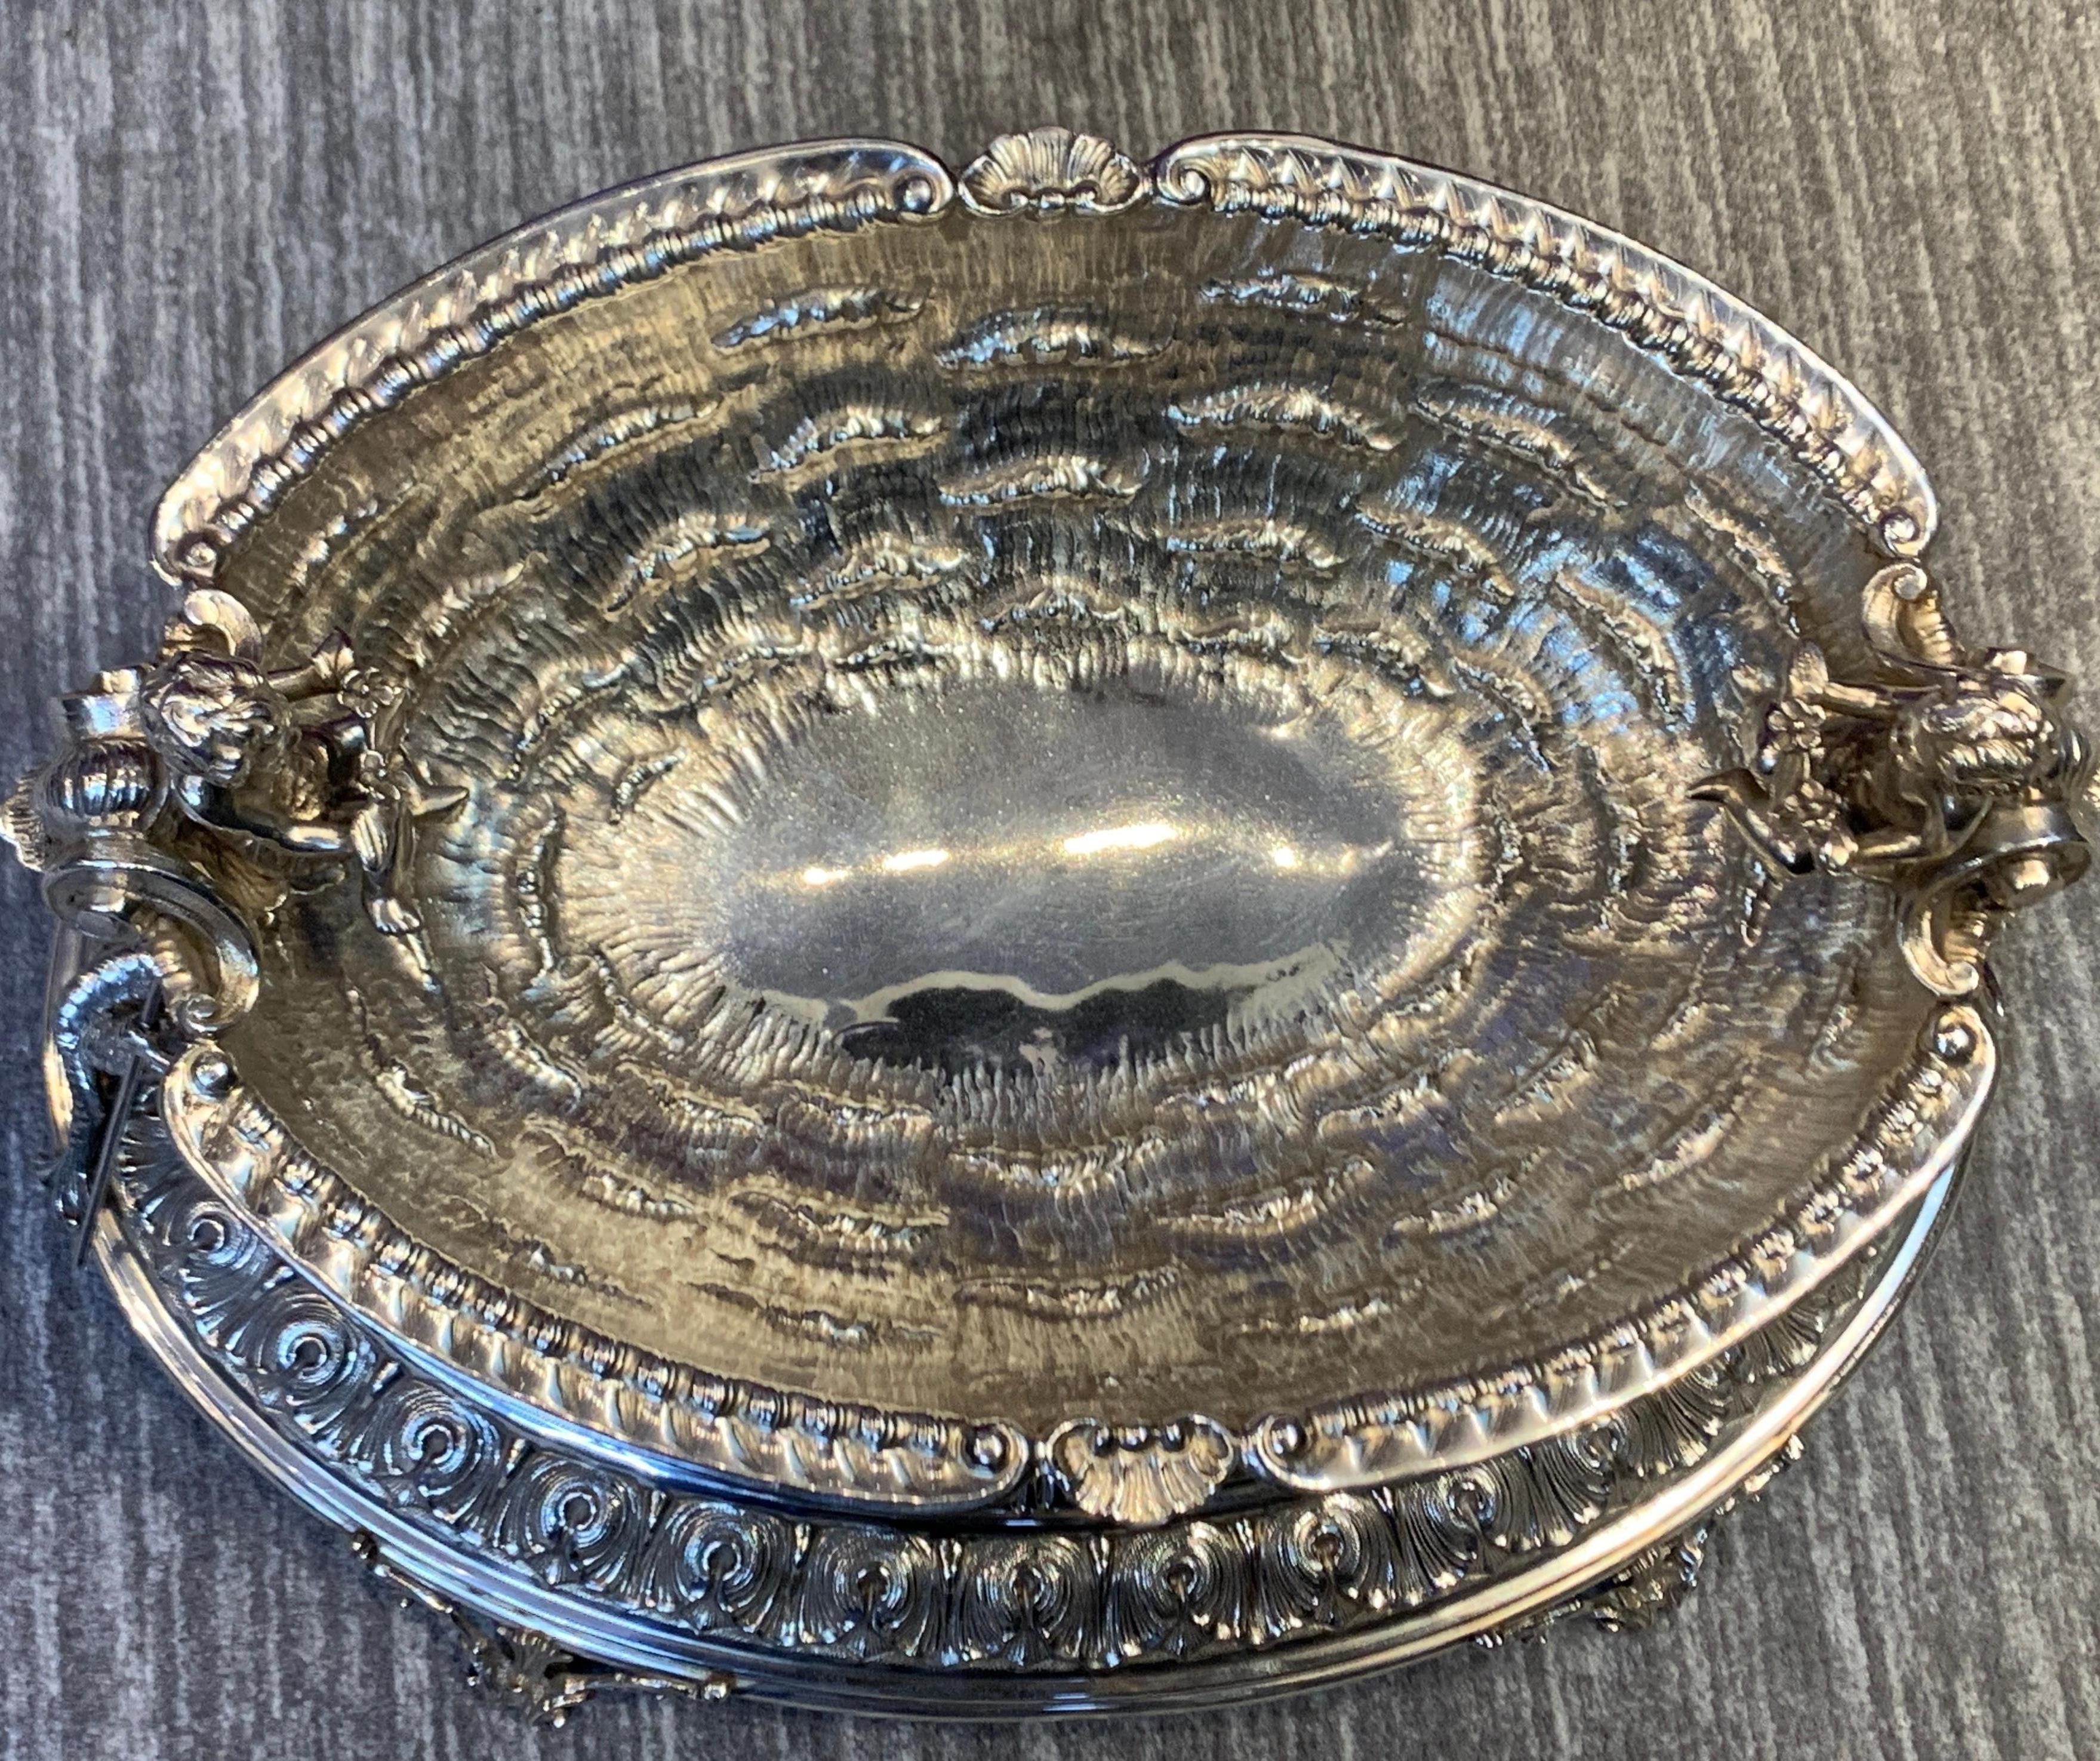 Exceptional Nautical Themed Silver Centerpiece by Buccellati For Sale 8